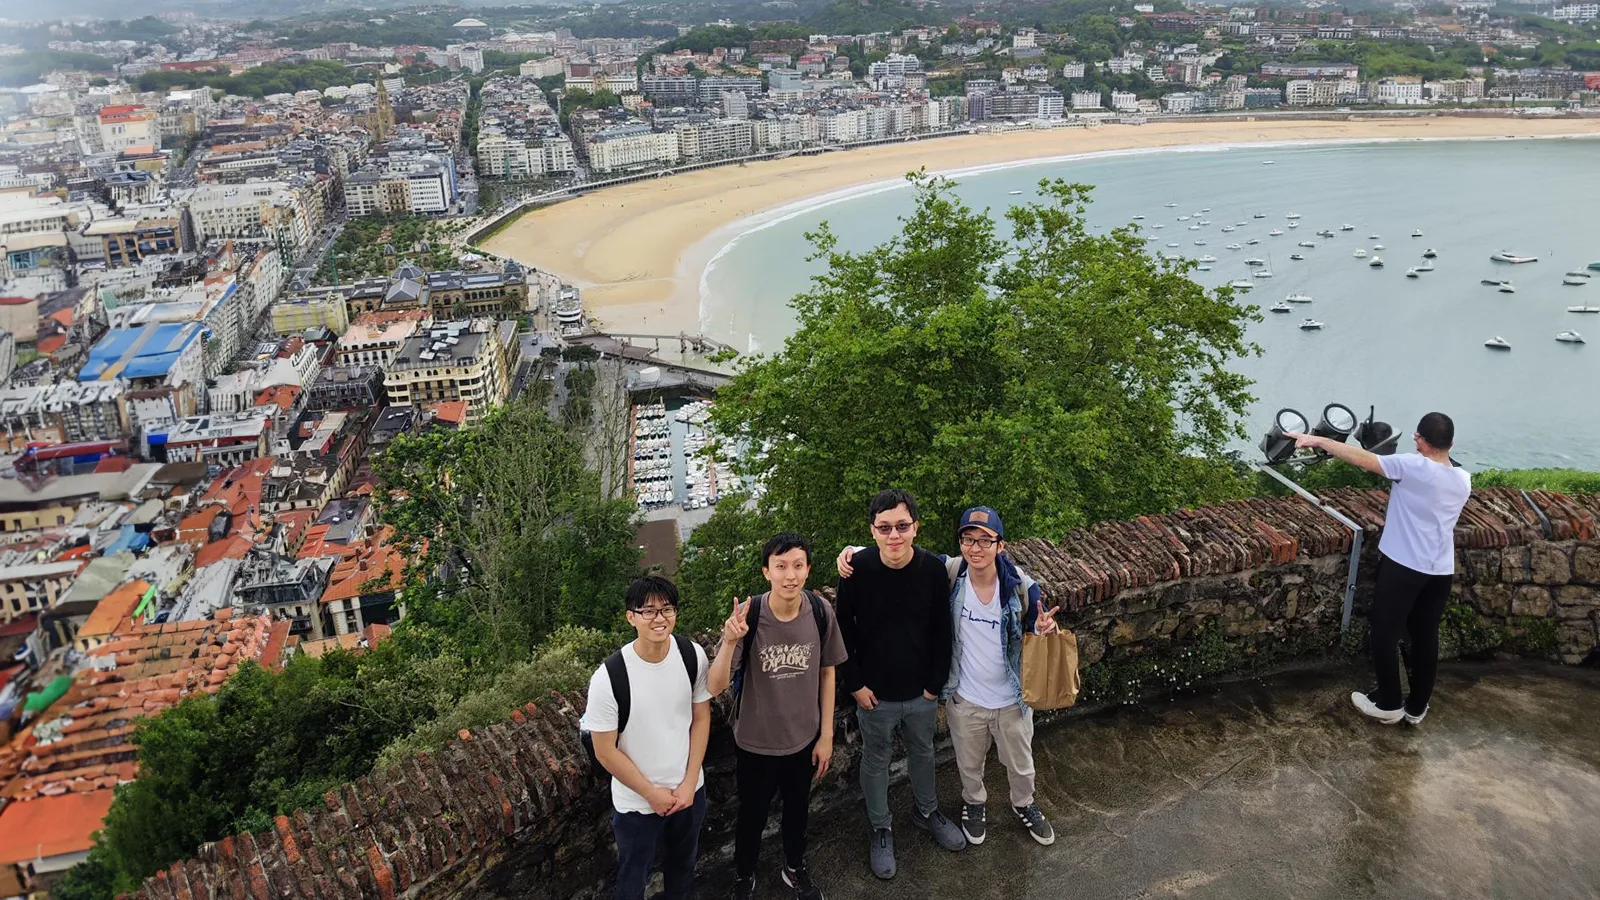 Three Singapore students pose for a group picture at La Concha beach, in Donosti